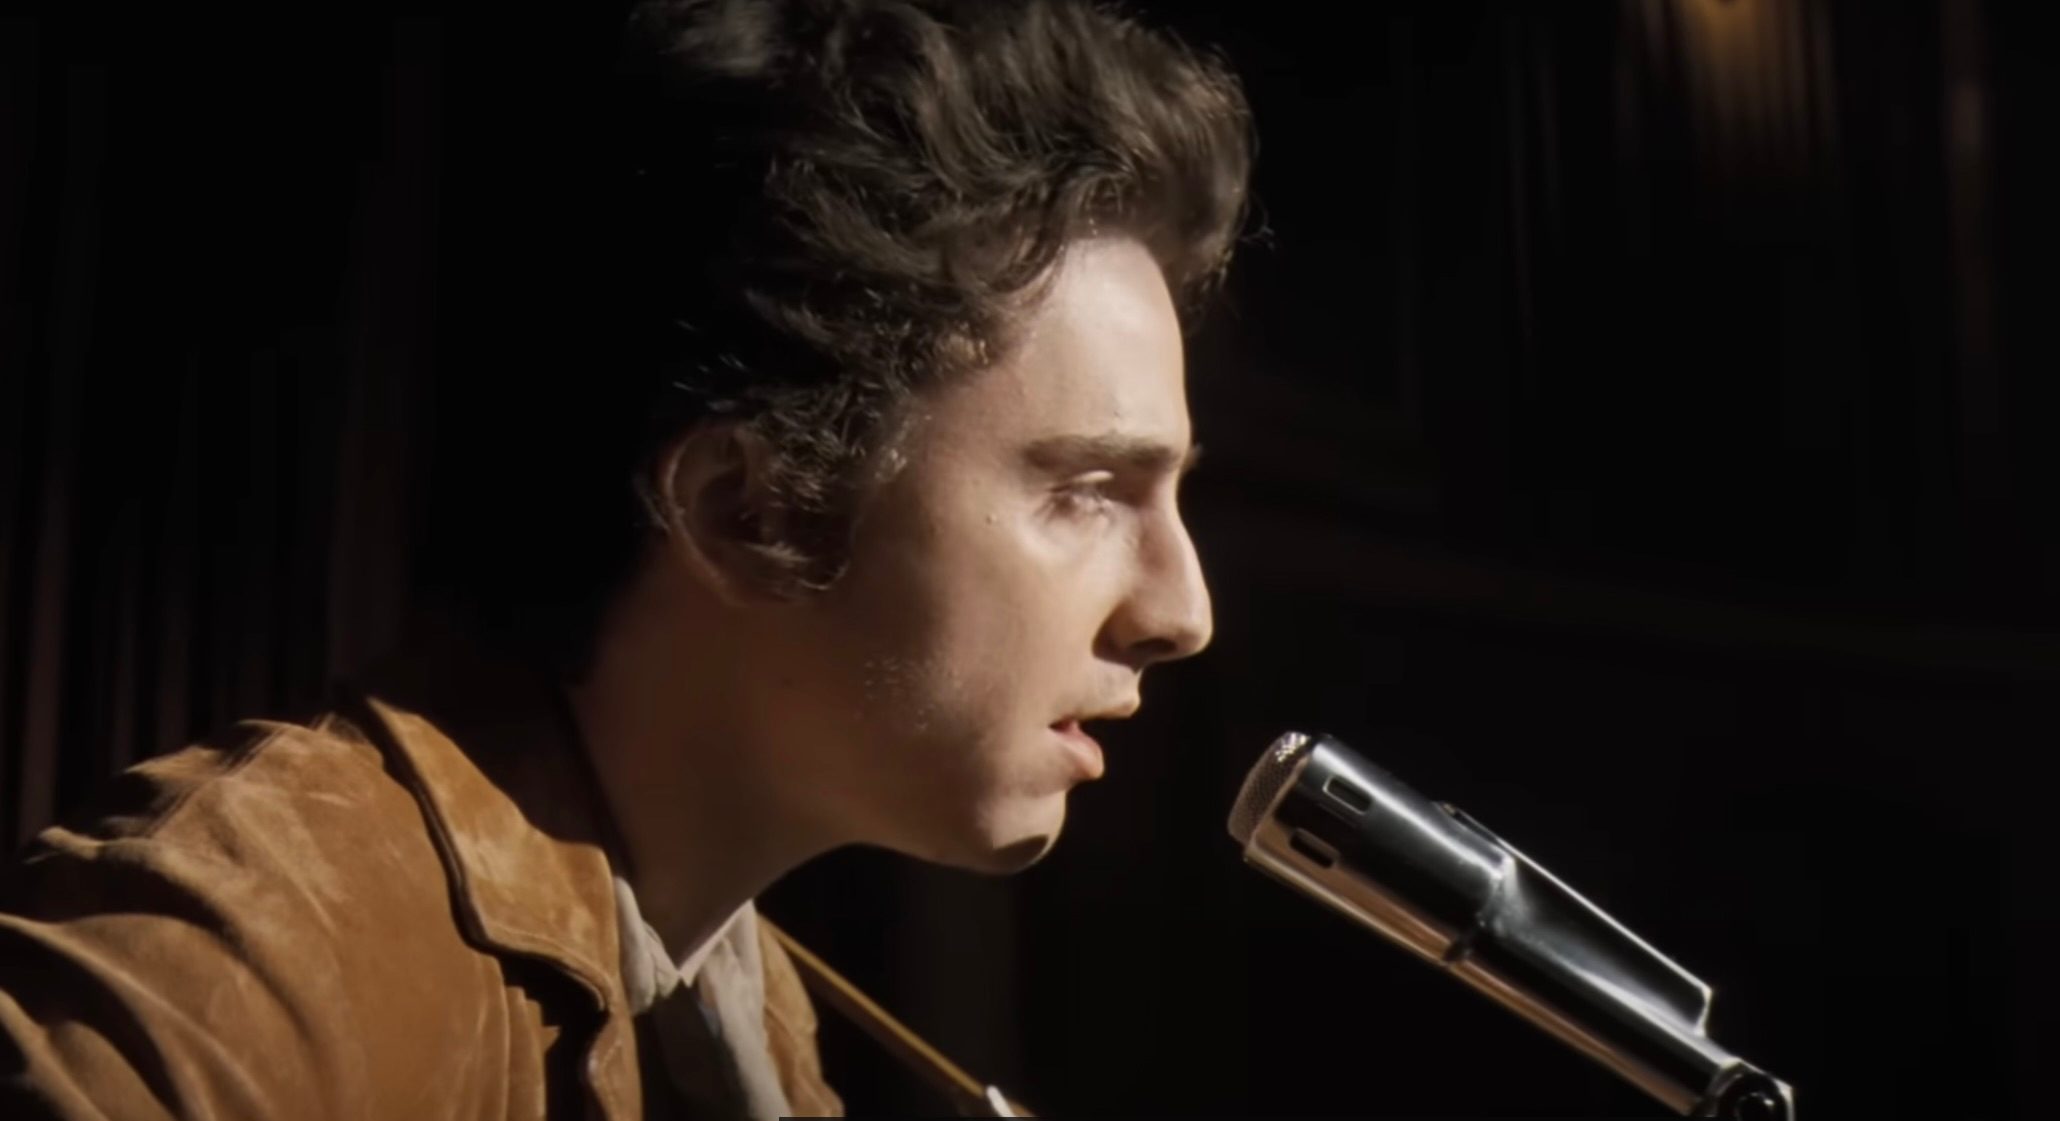 First Trailer Released For Upcoming Bob Dylan Biopic ‘A Complete Unknown’